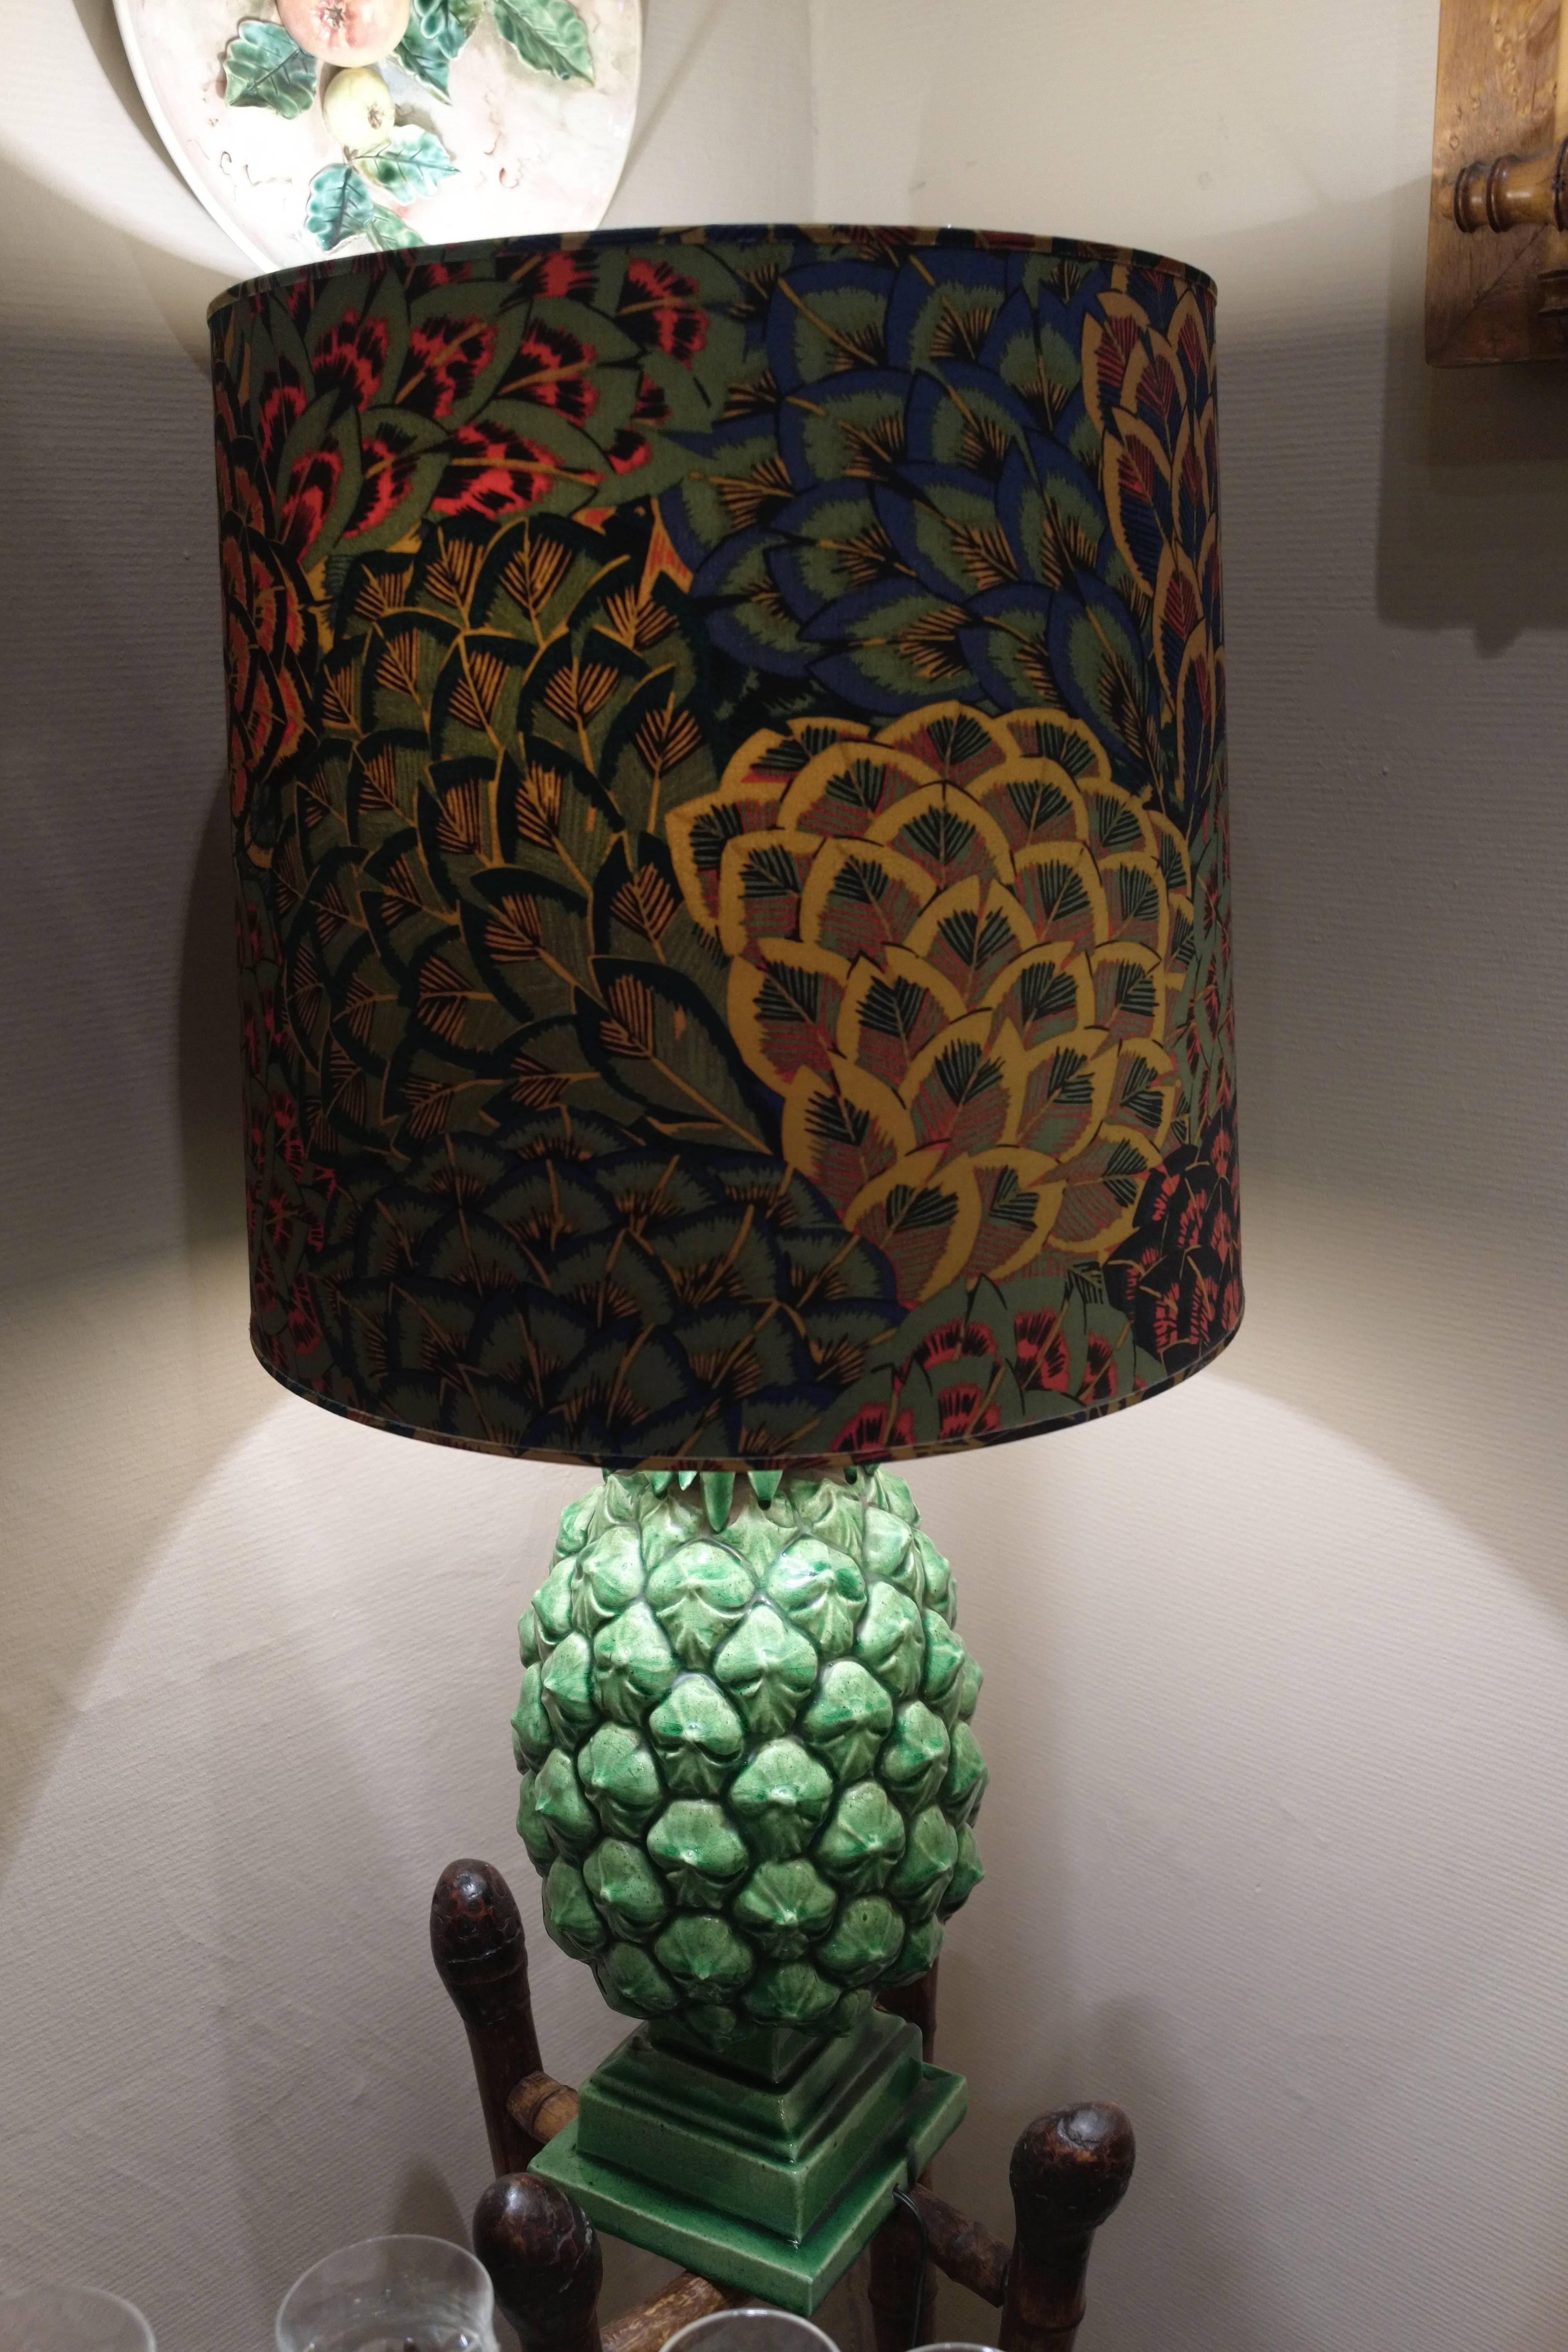 Modern Pair of Two Green Ceramic Pineapple Table Lamps, circa 1970, 20th Century